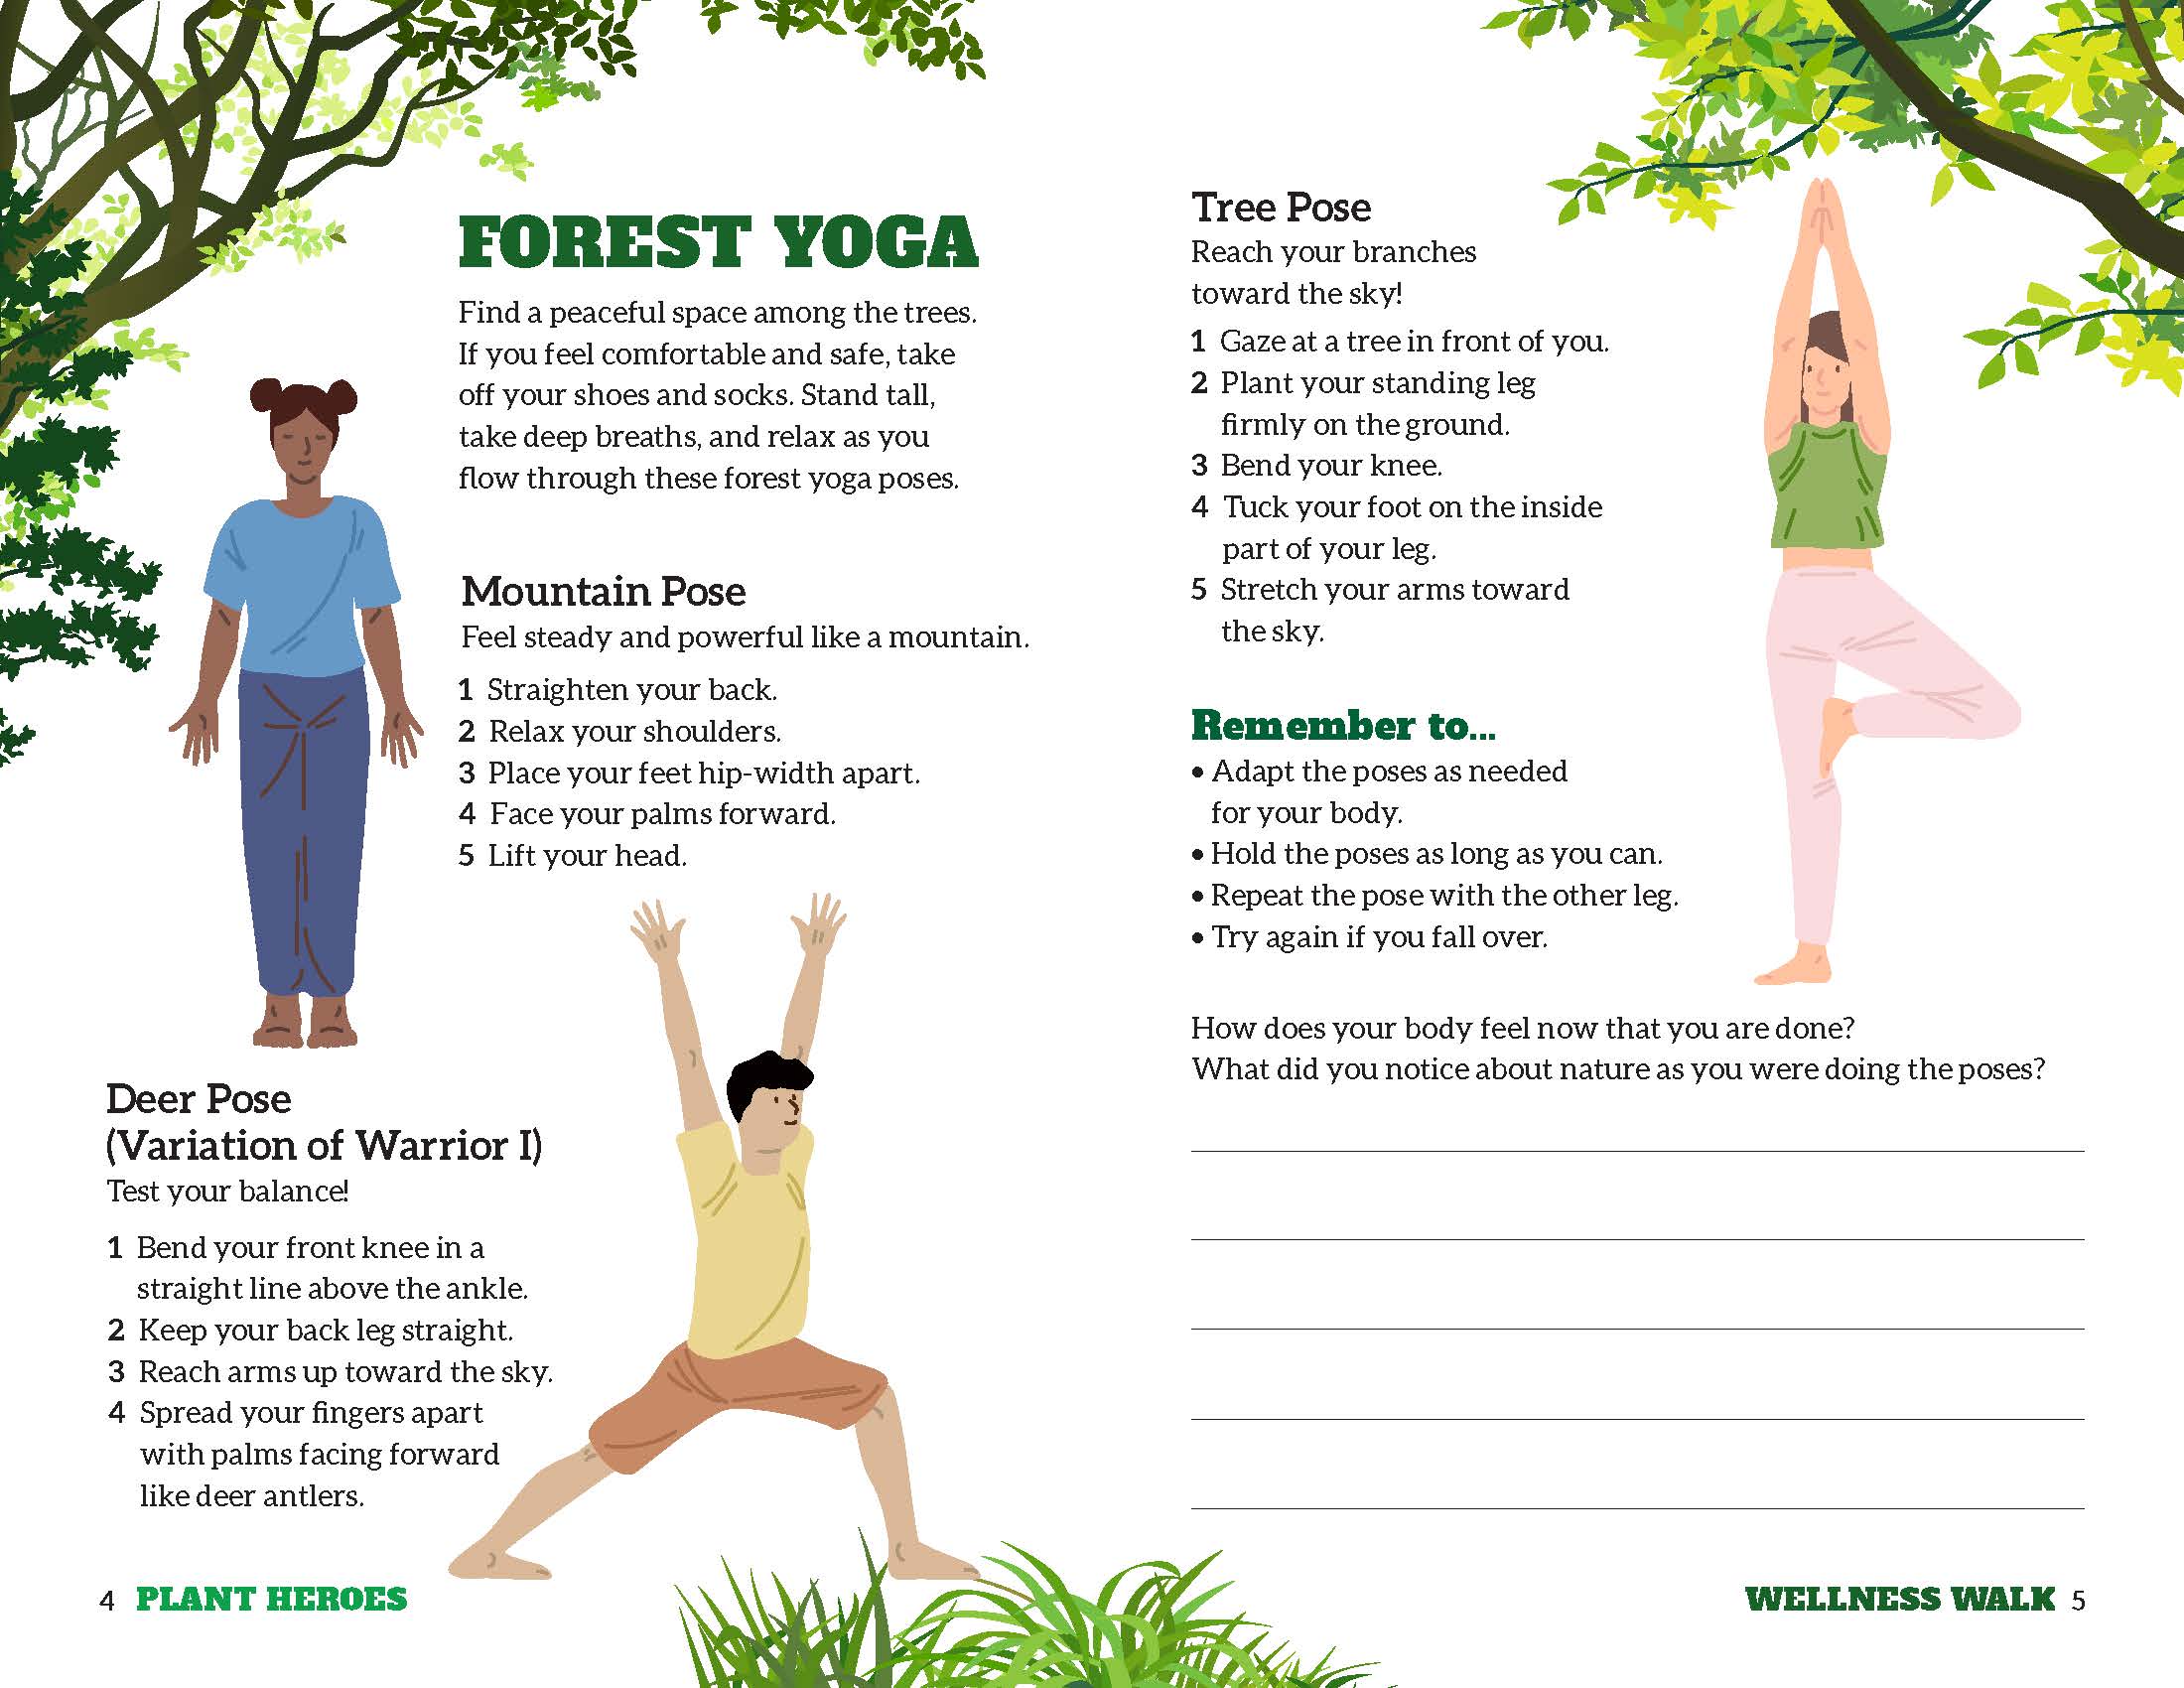 3 figures preforming forest yoga poses